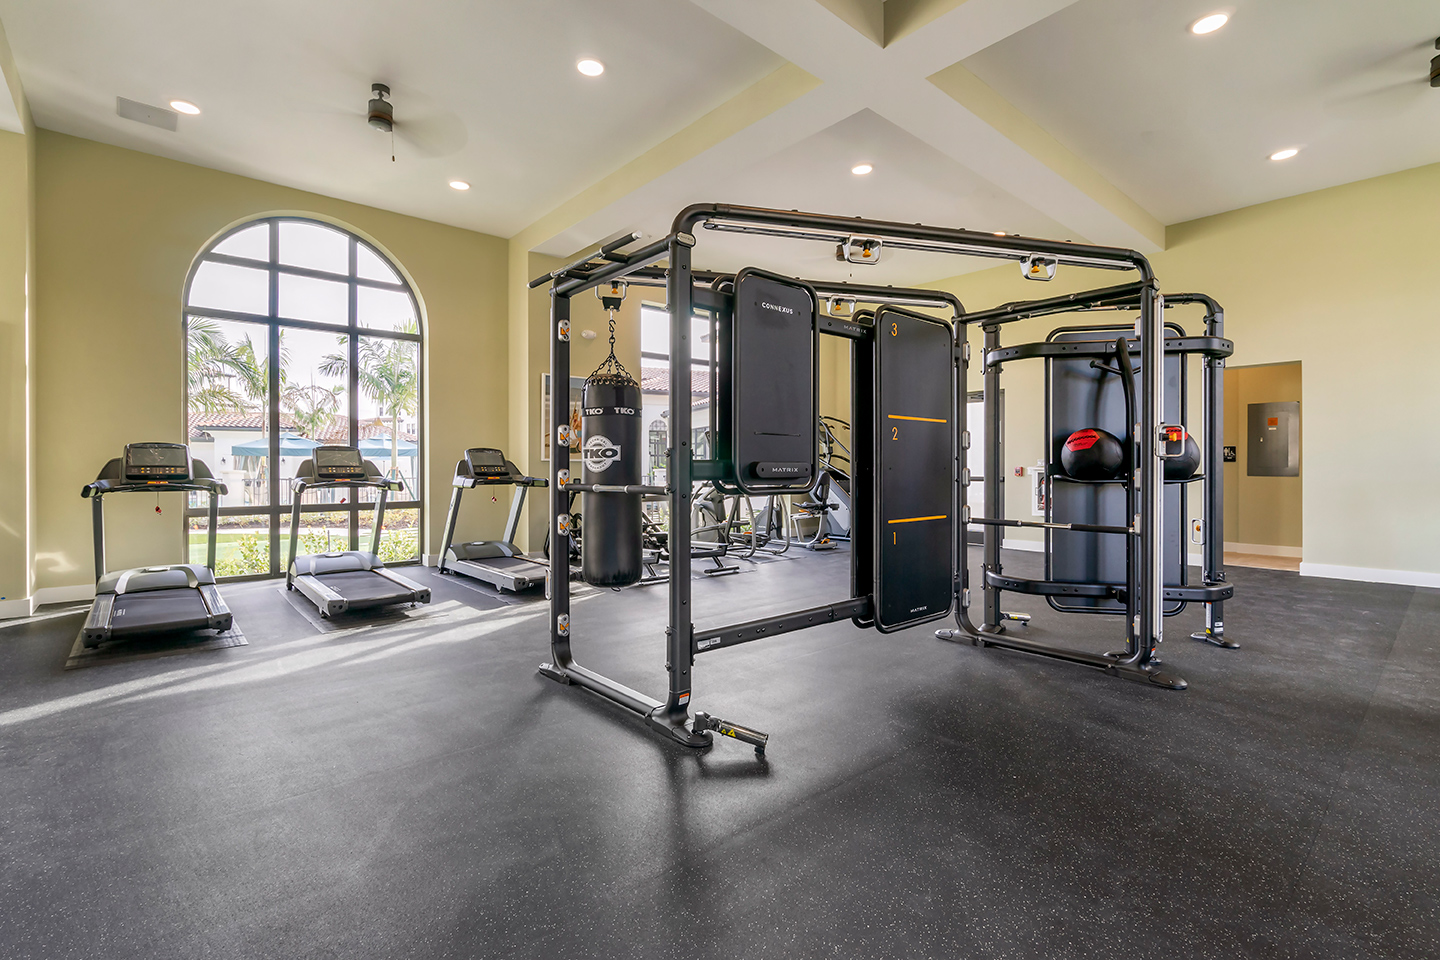 Community fitness center with cardio machines and strength training equipment